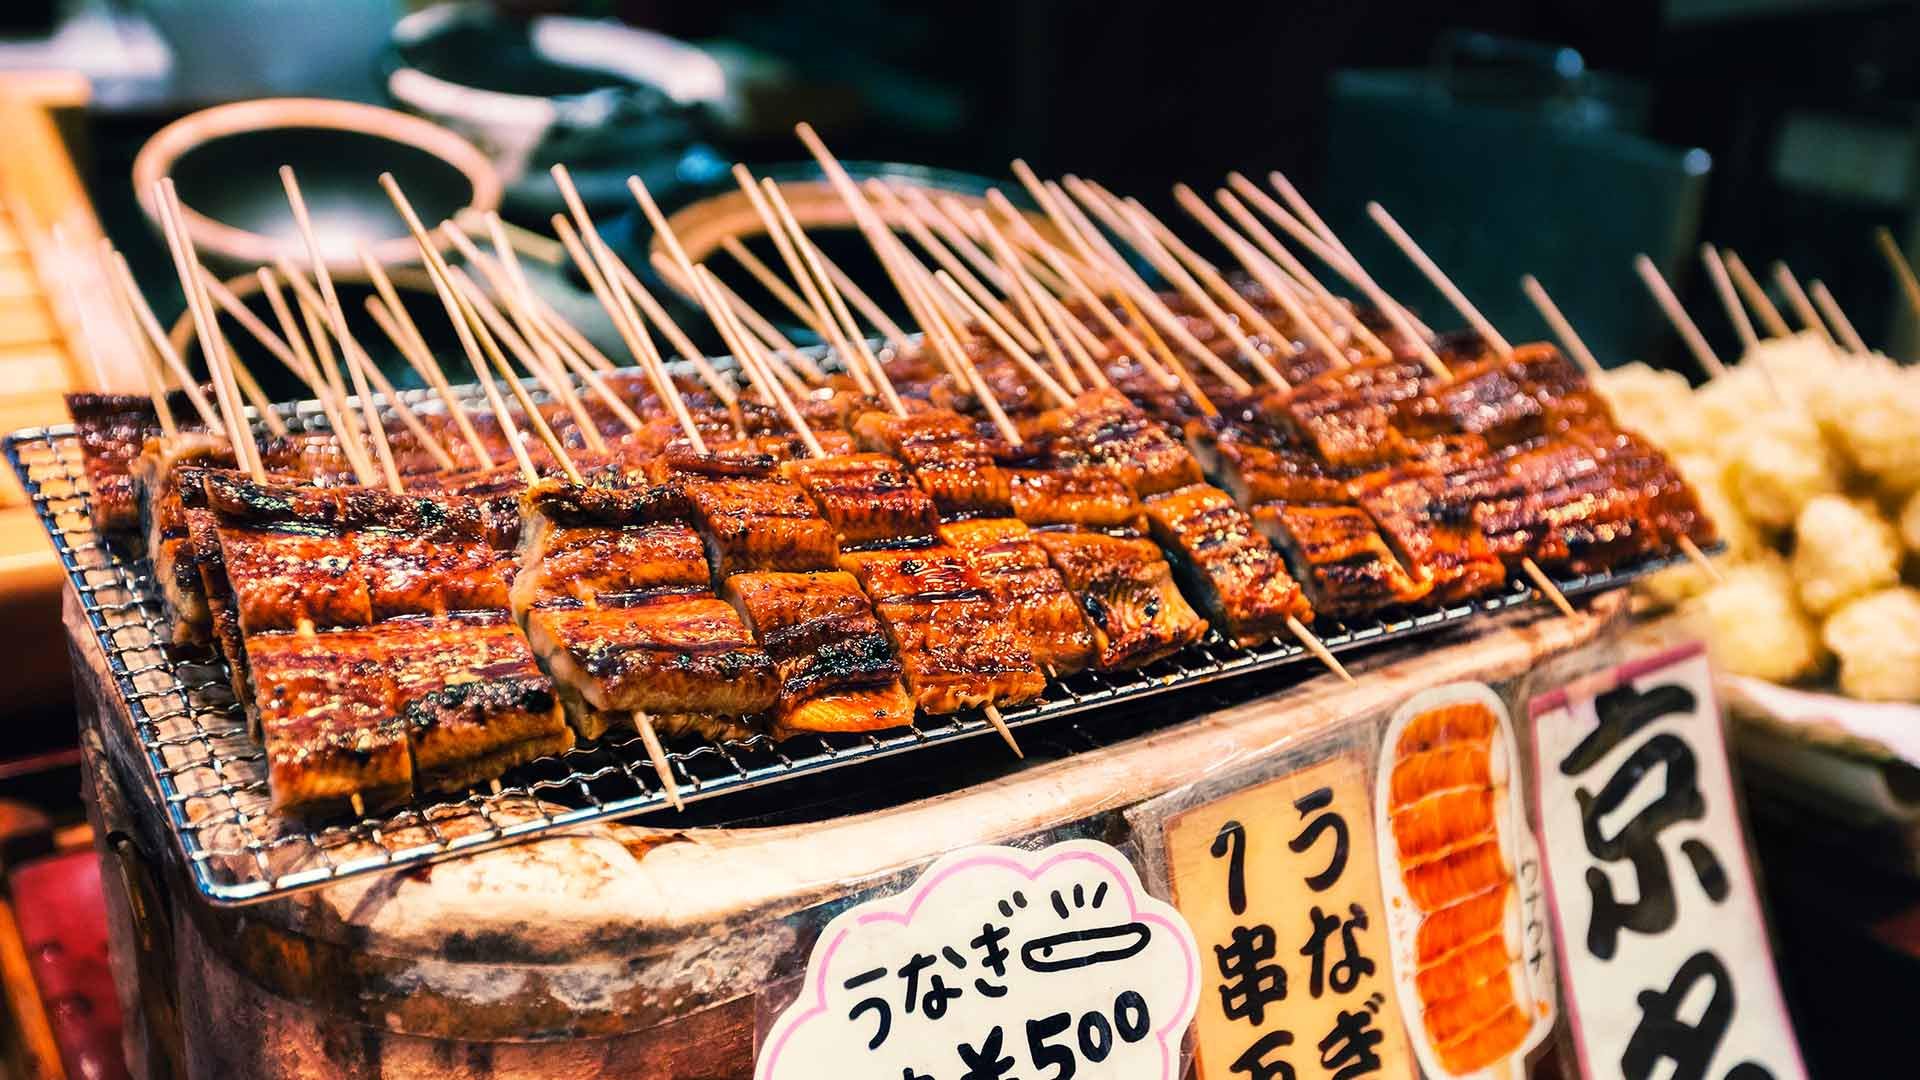 10 Japanese Food Blogs to Make Your Mouth Water